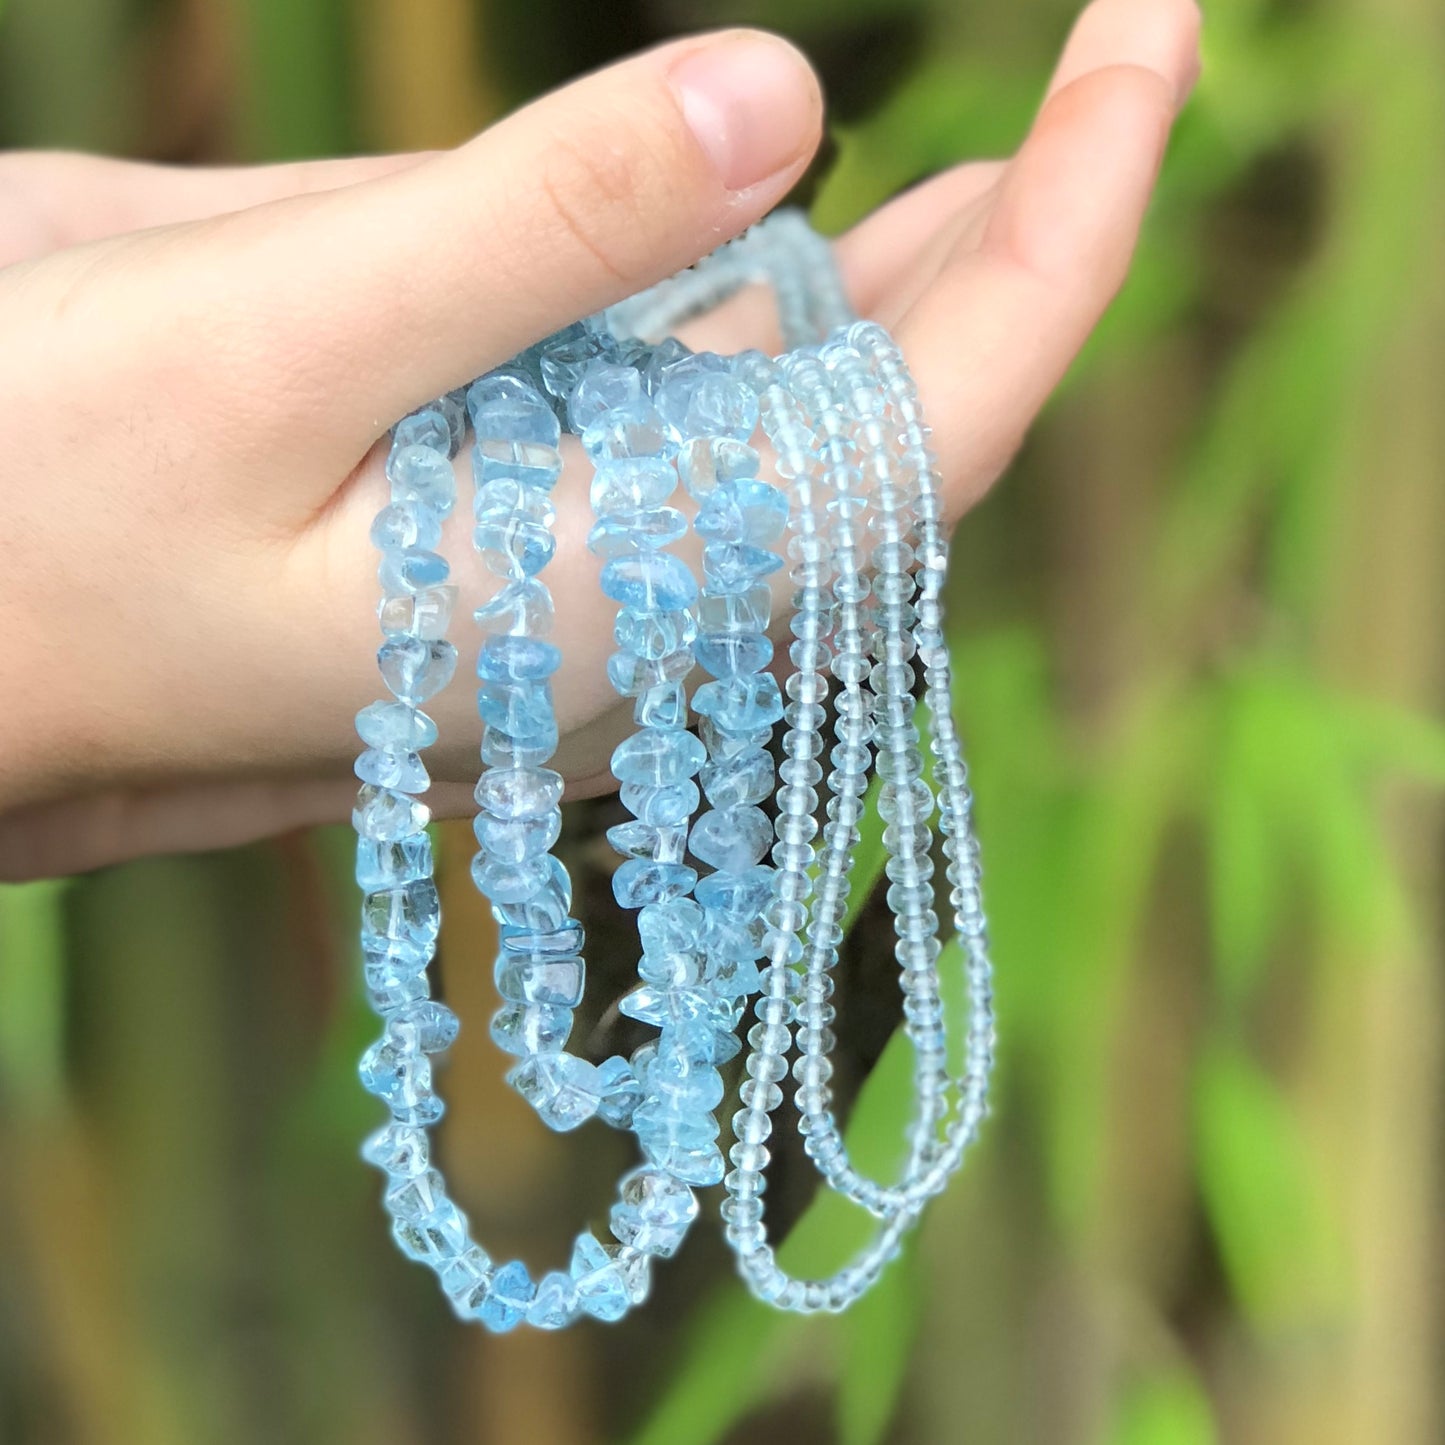 Hands holding two crystal healing Aquamarine necklaces known for heightening your awareness of truth